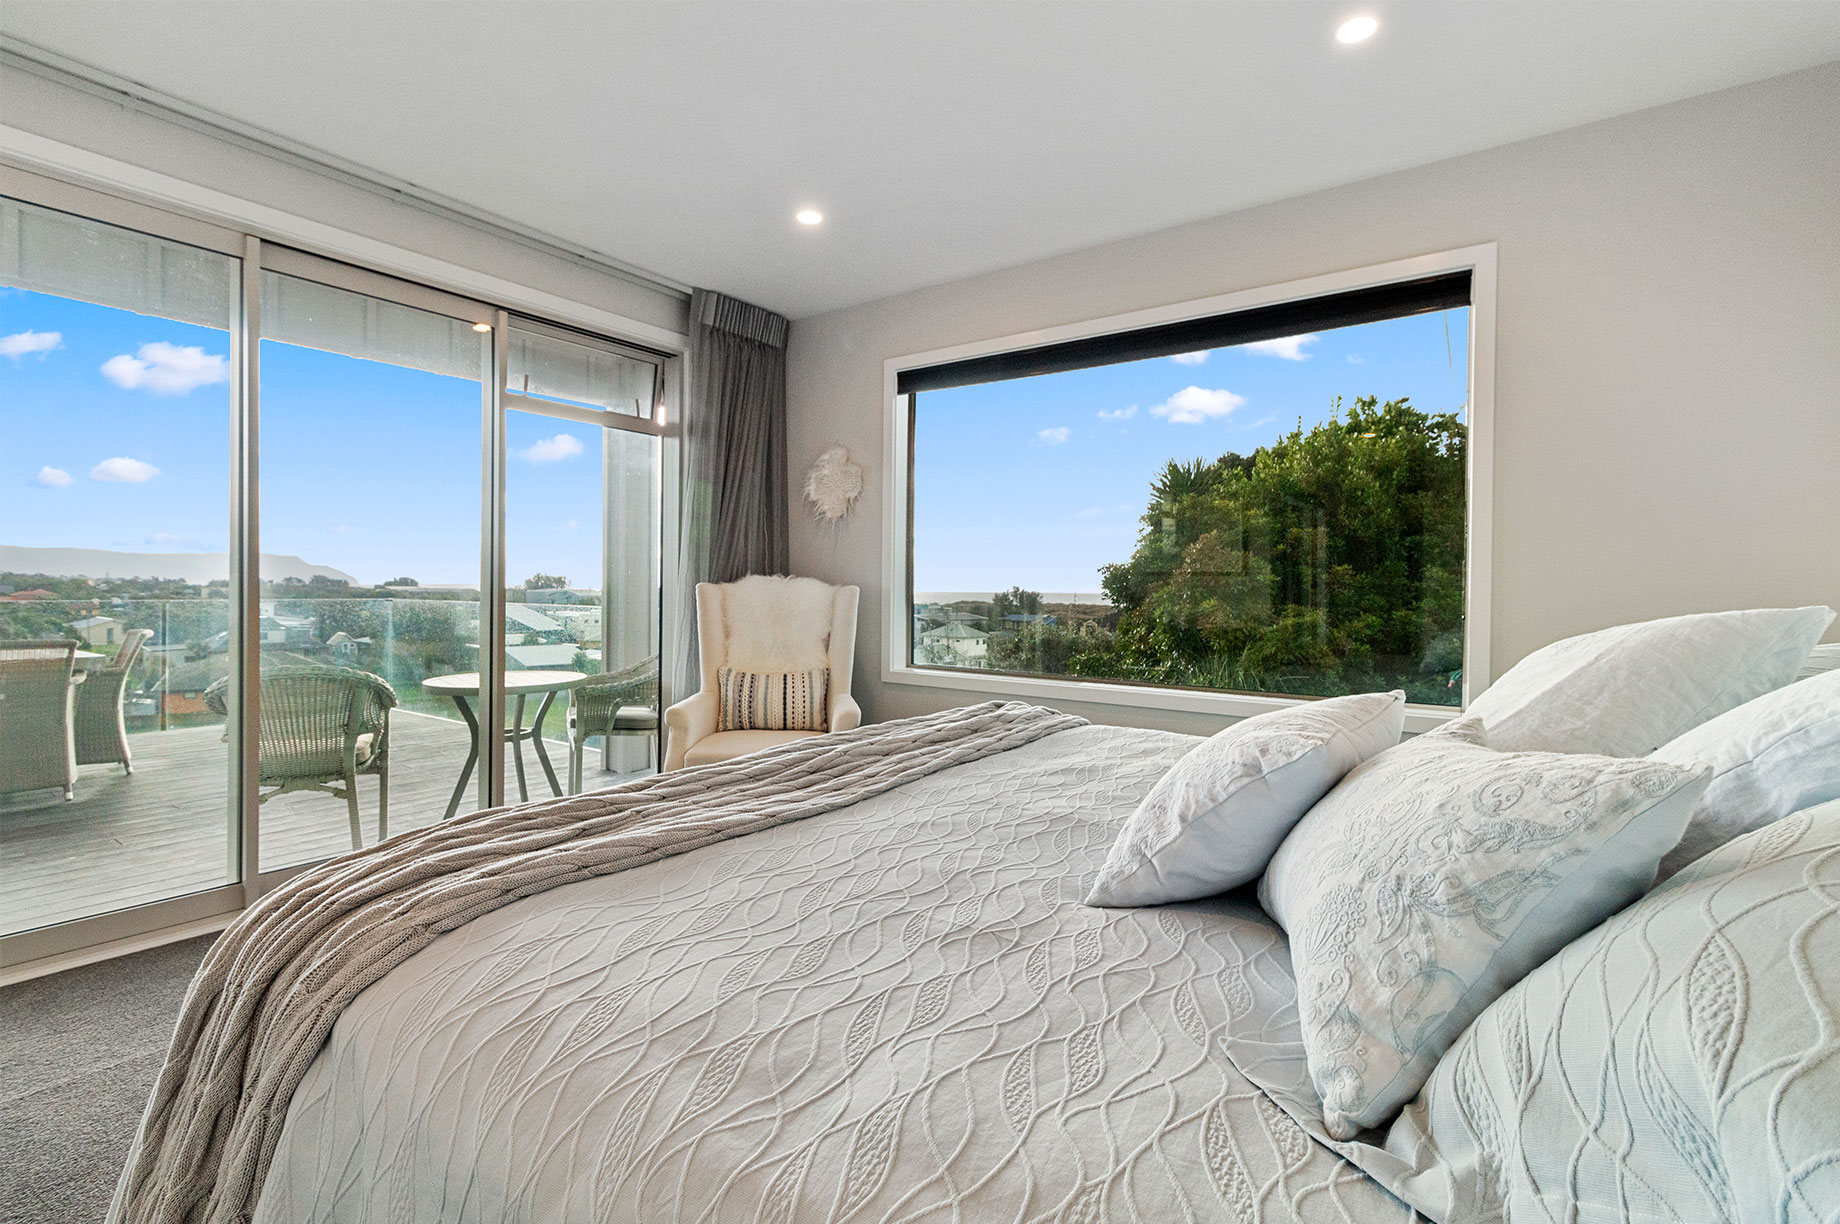 Master bedroom with a sliding door to the balcony